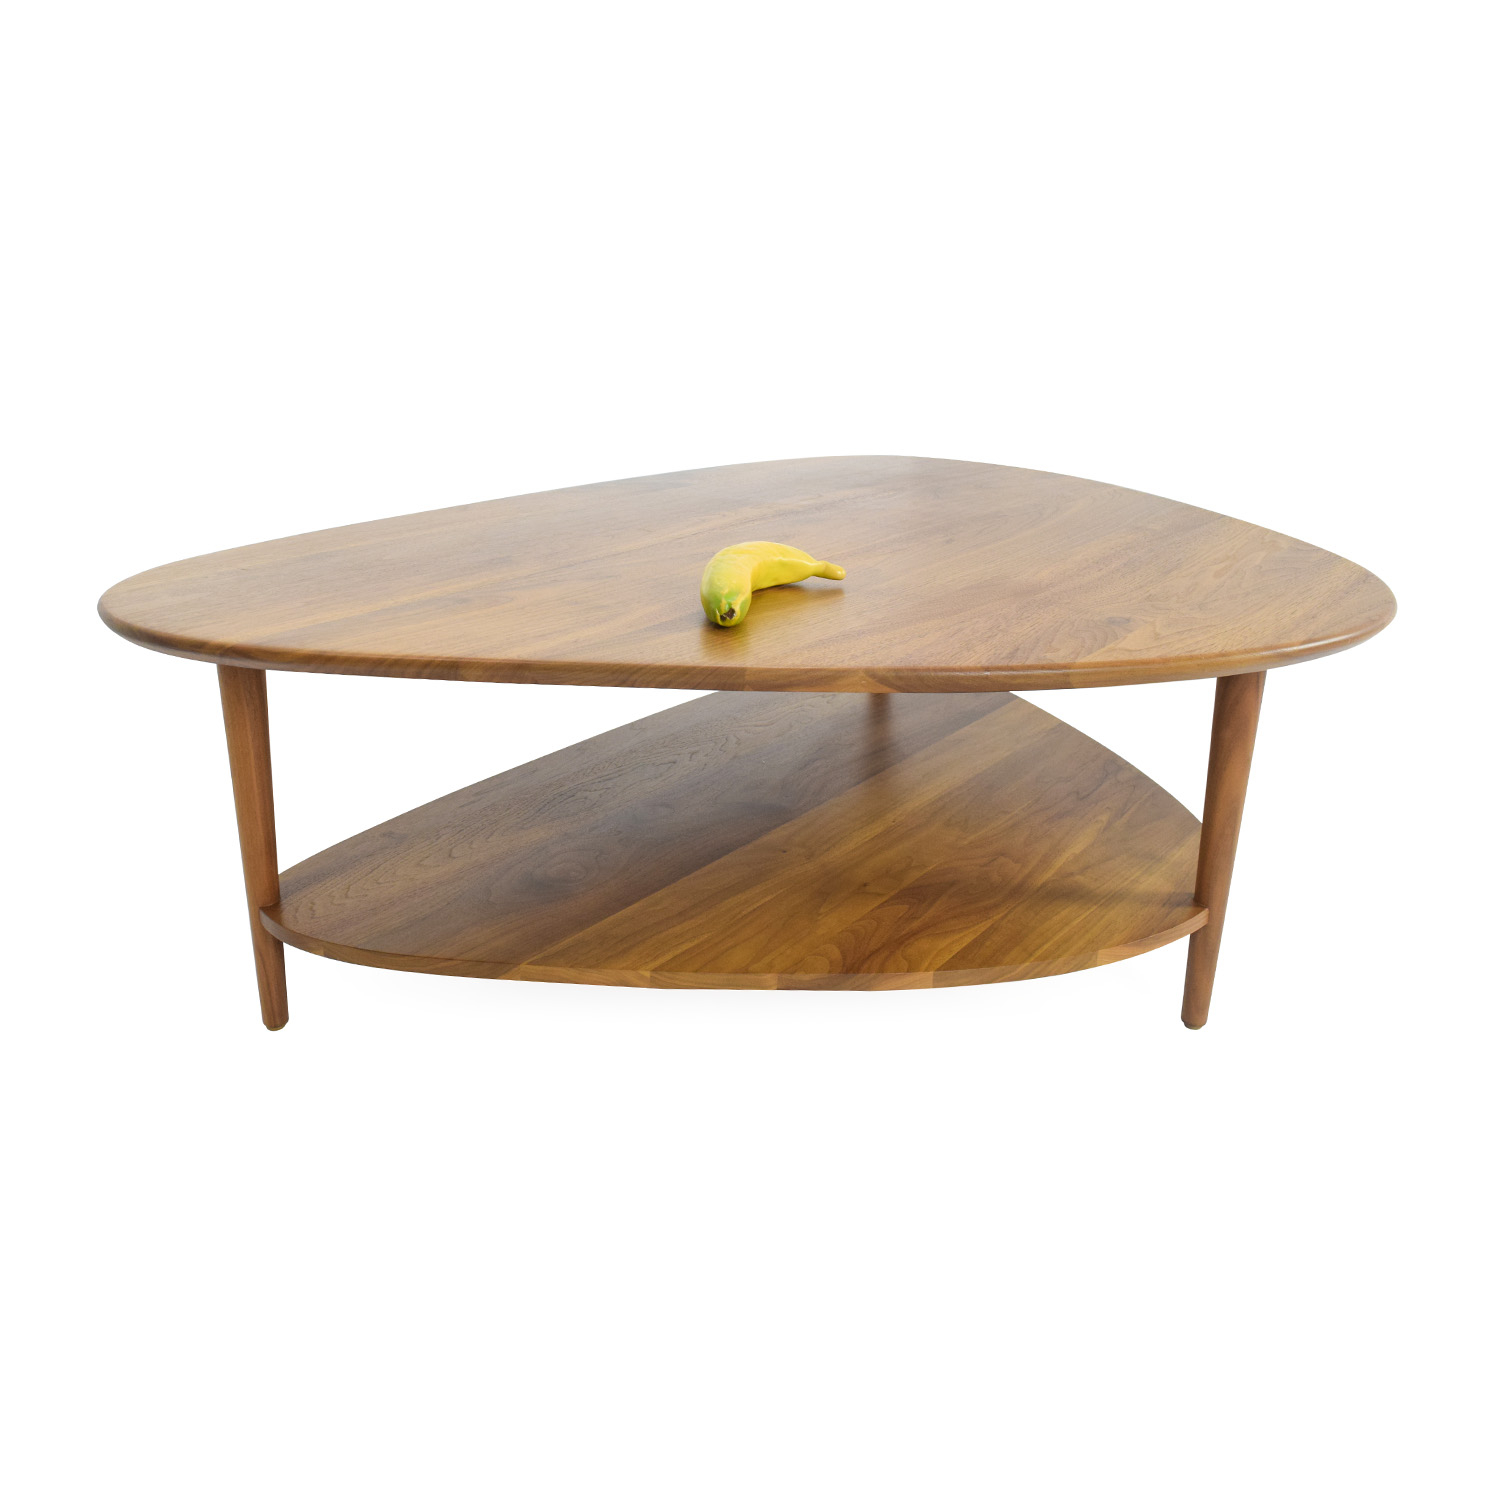 Room And Board Coffee Table Hipenmoedernl pertaining to size 1500 X 1500